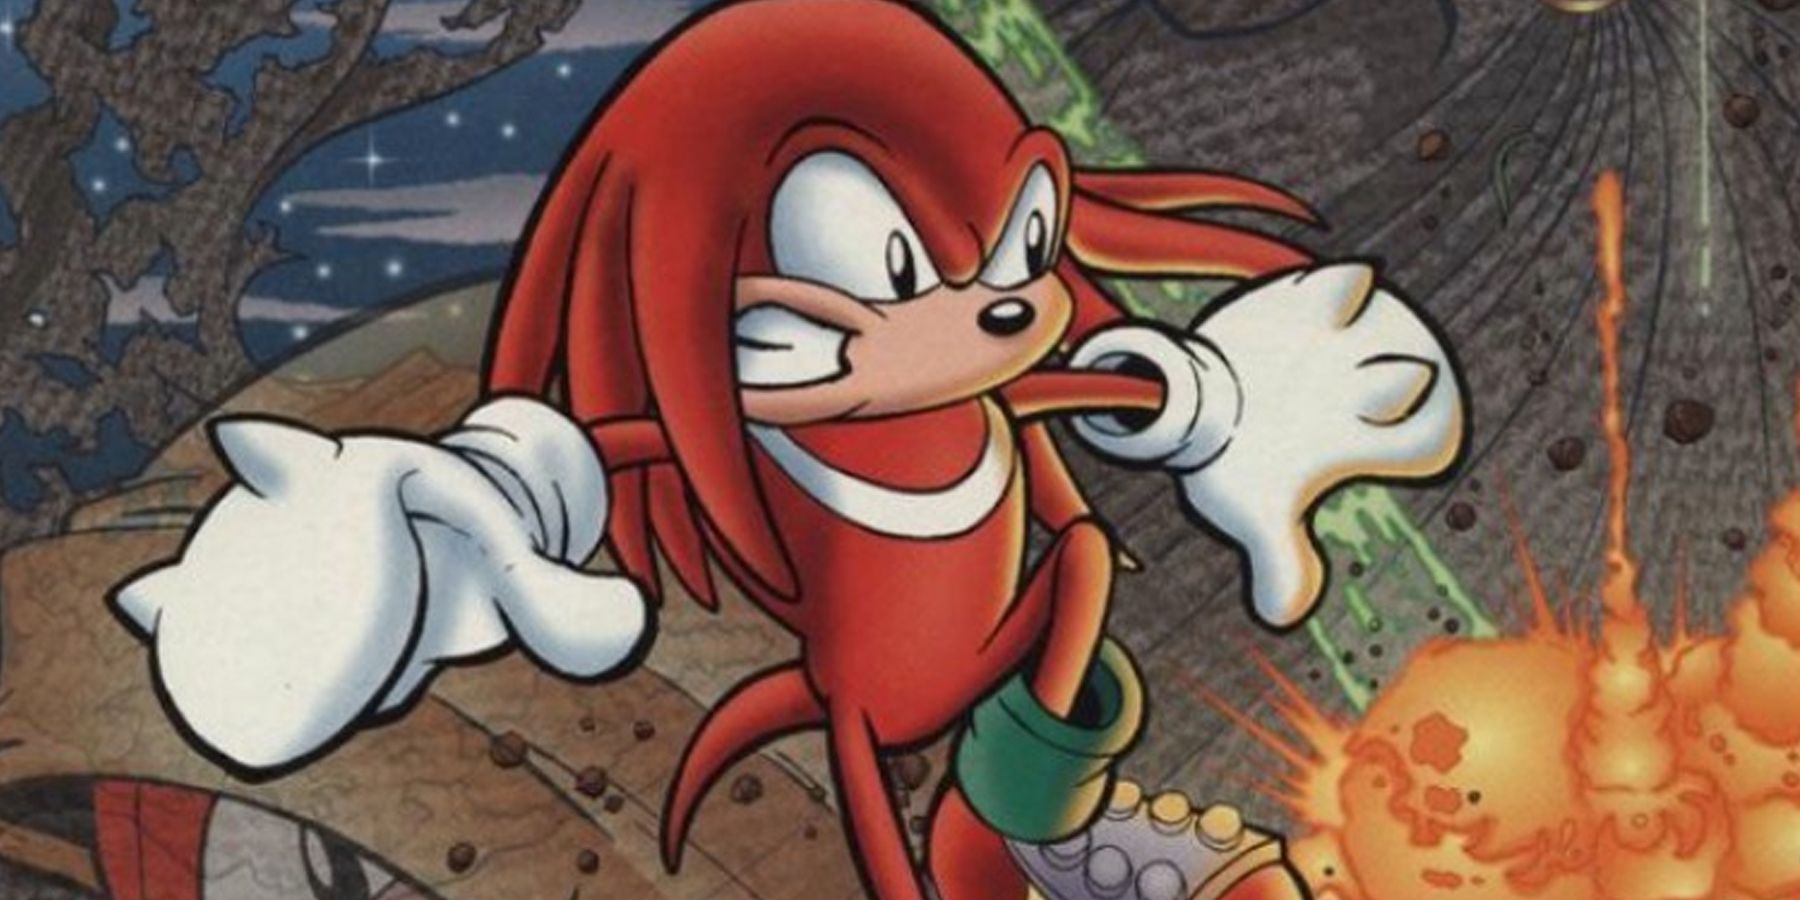 Knuckles in another universe